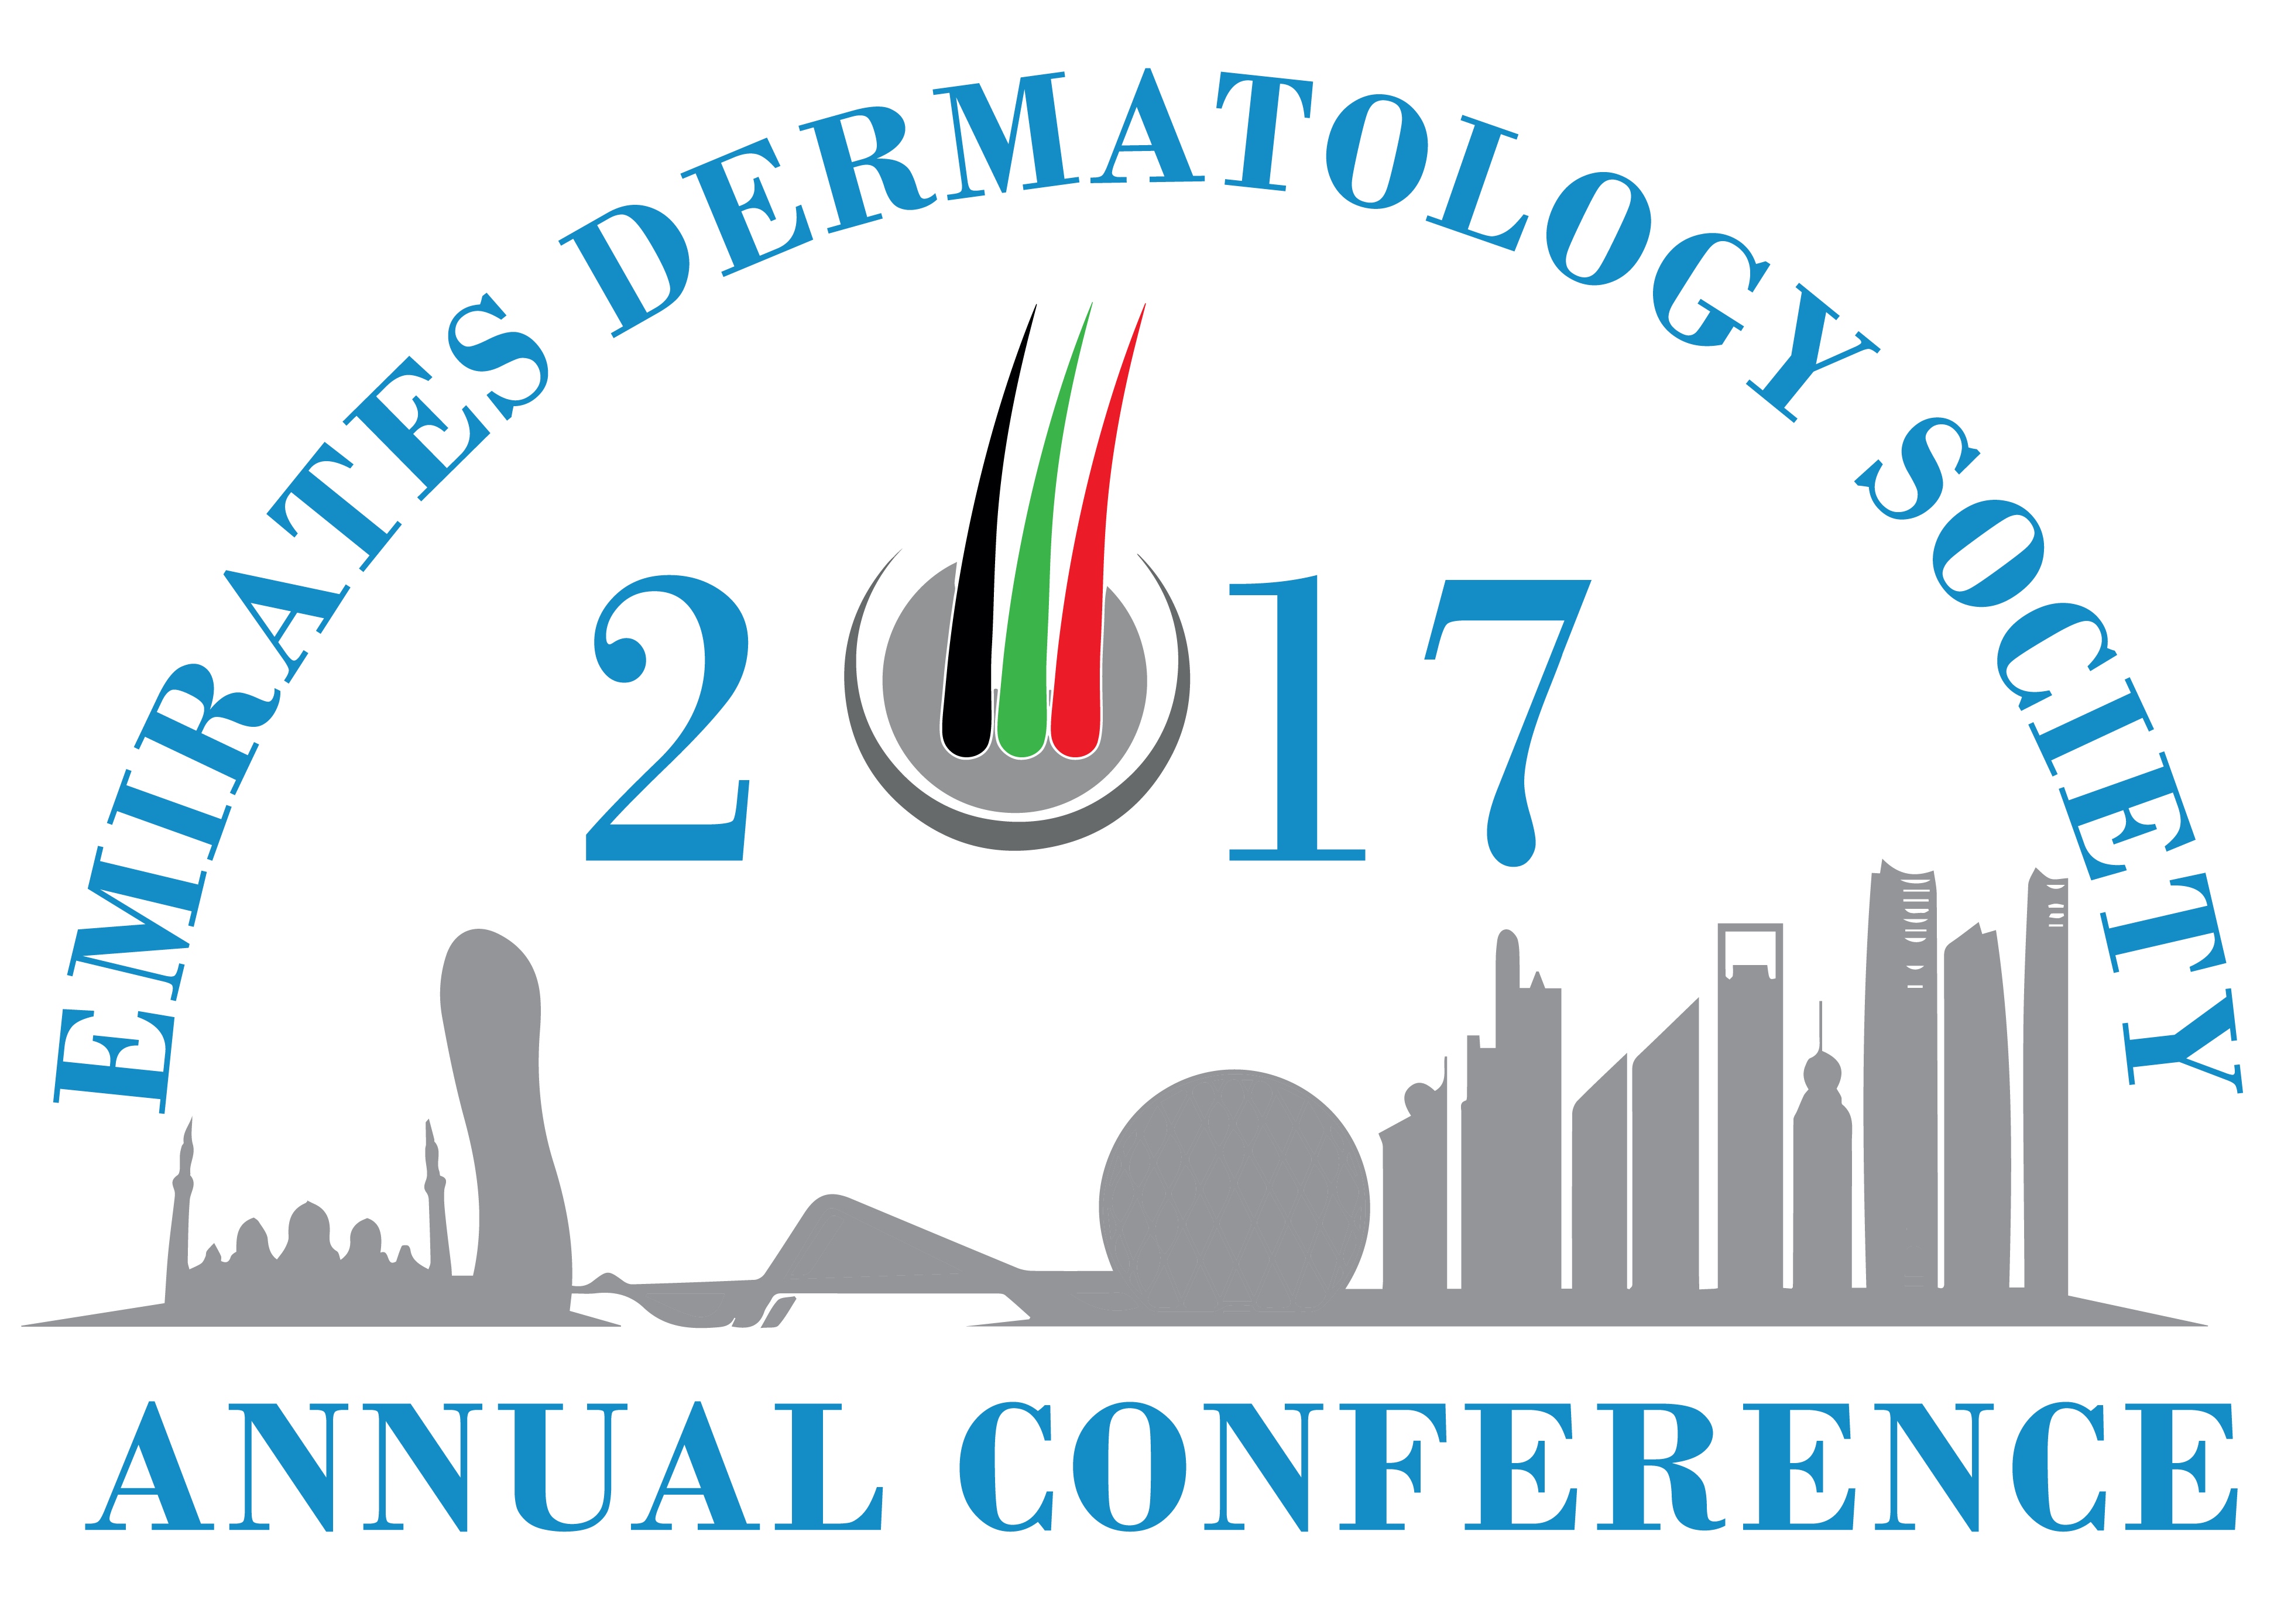 The Emirates Dermatology Society is proud to announce the first yearly EDS Conference. This premier conference is scheduled to be held on 17 - 19 November 2017, Jumeirah at Etihad Towers Hotel, in Abu Dhabi - United Arab Emirates.
